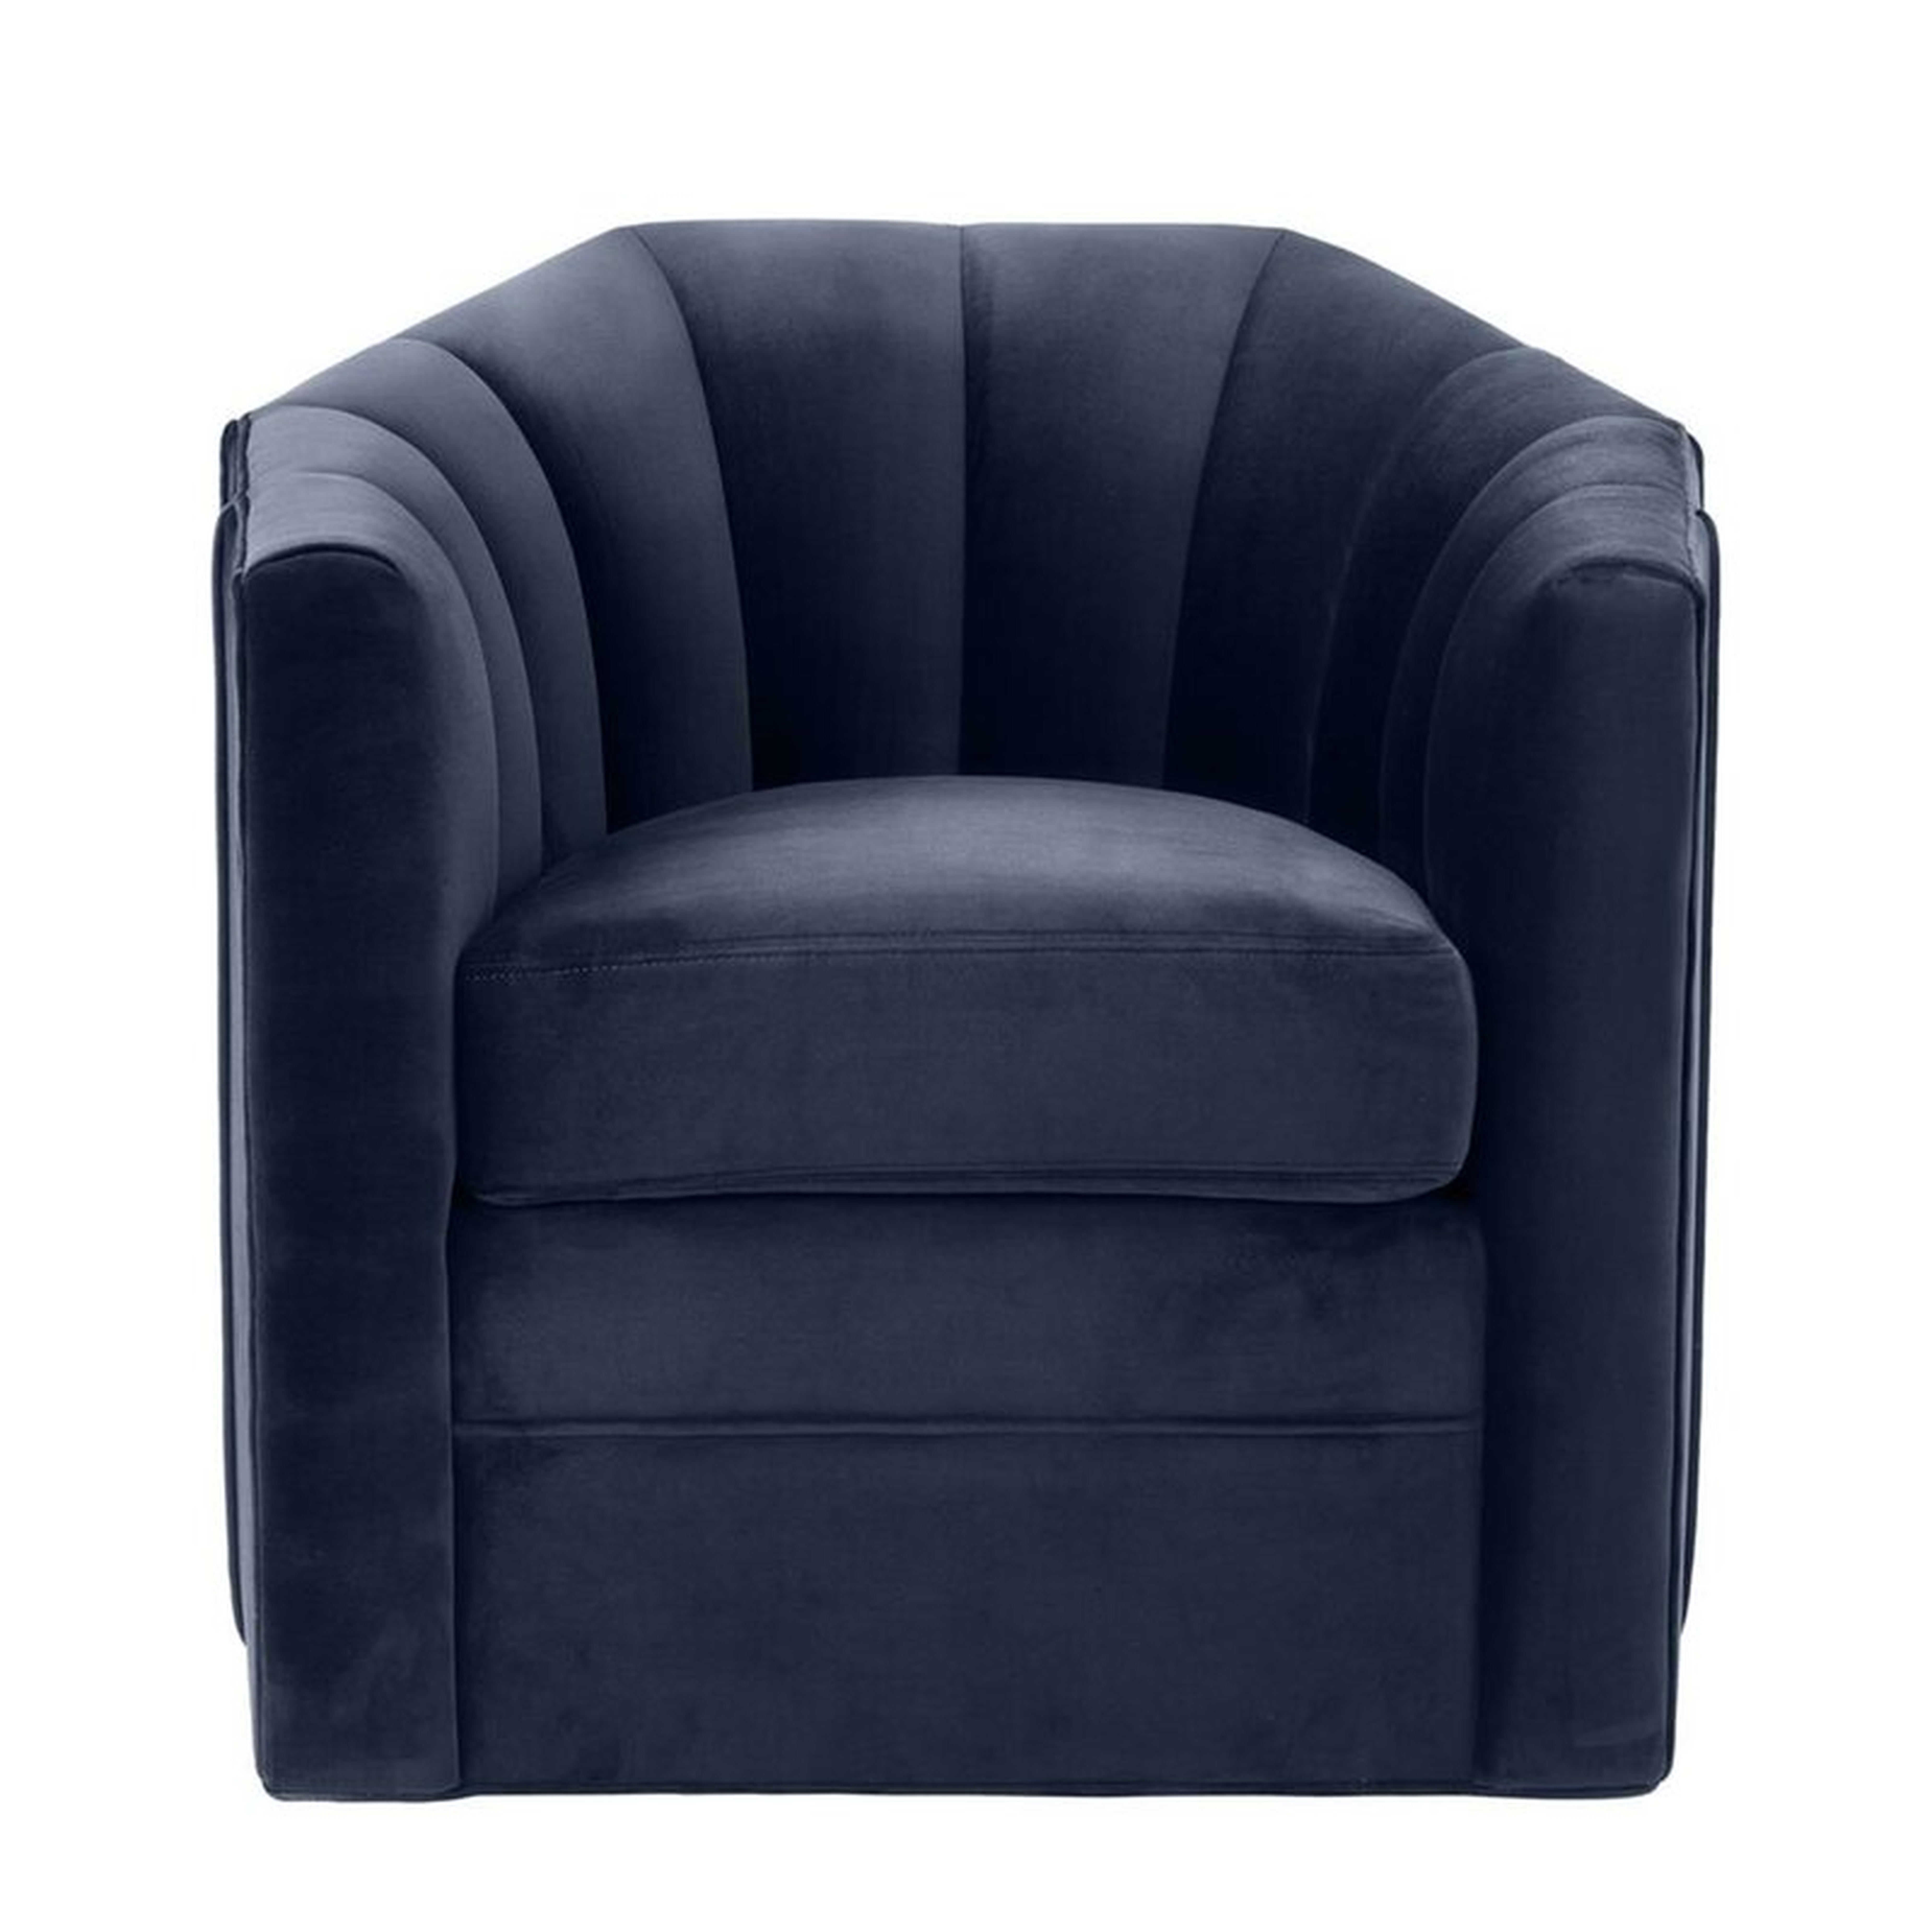 Delancey Barrel Chair Upholstery Color: Blue - Perigold